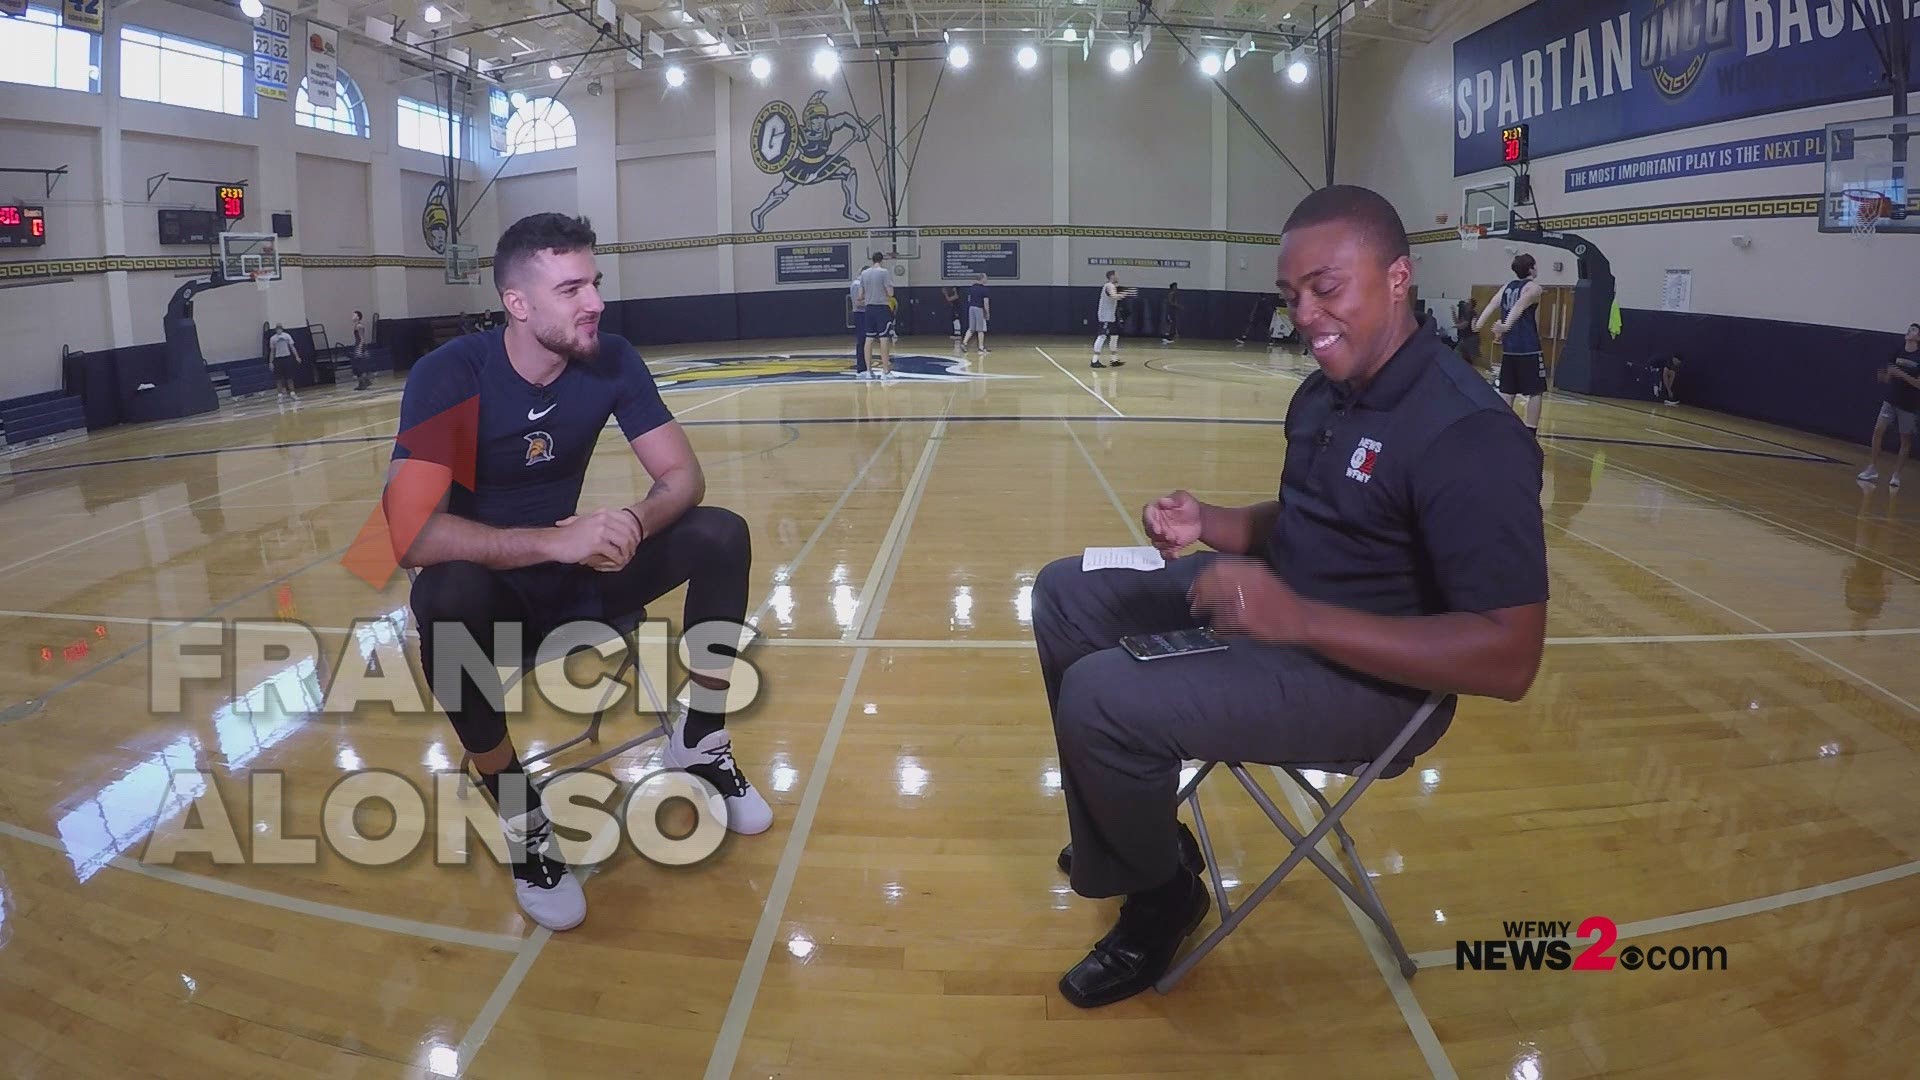 UNCG senior guard Francis Alonso sits down with WFMY News 2's Patrick Wright for one minute of rapid-fire questions.